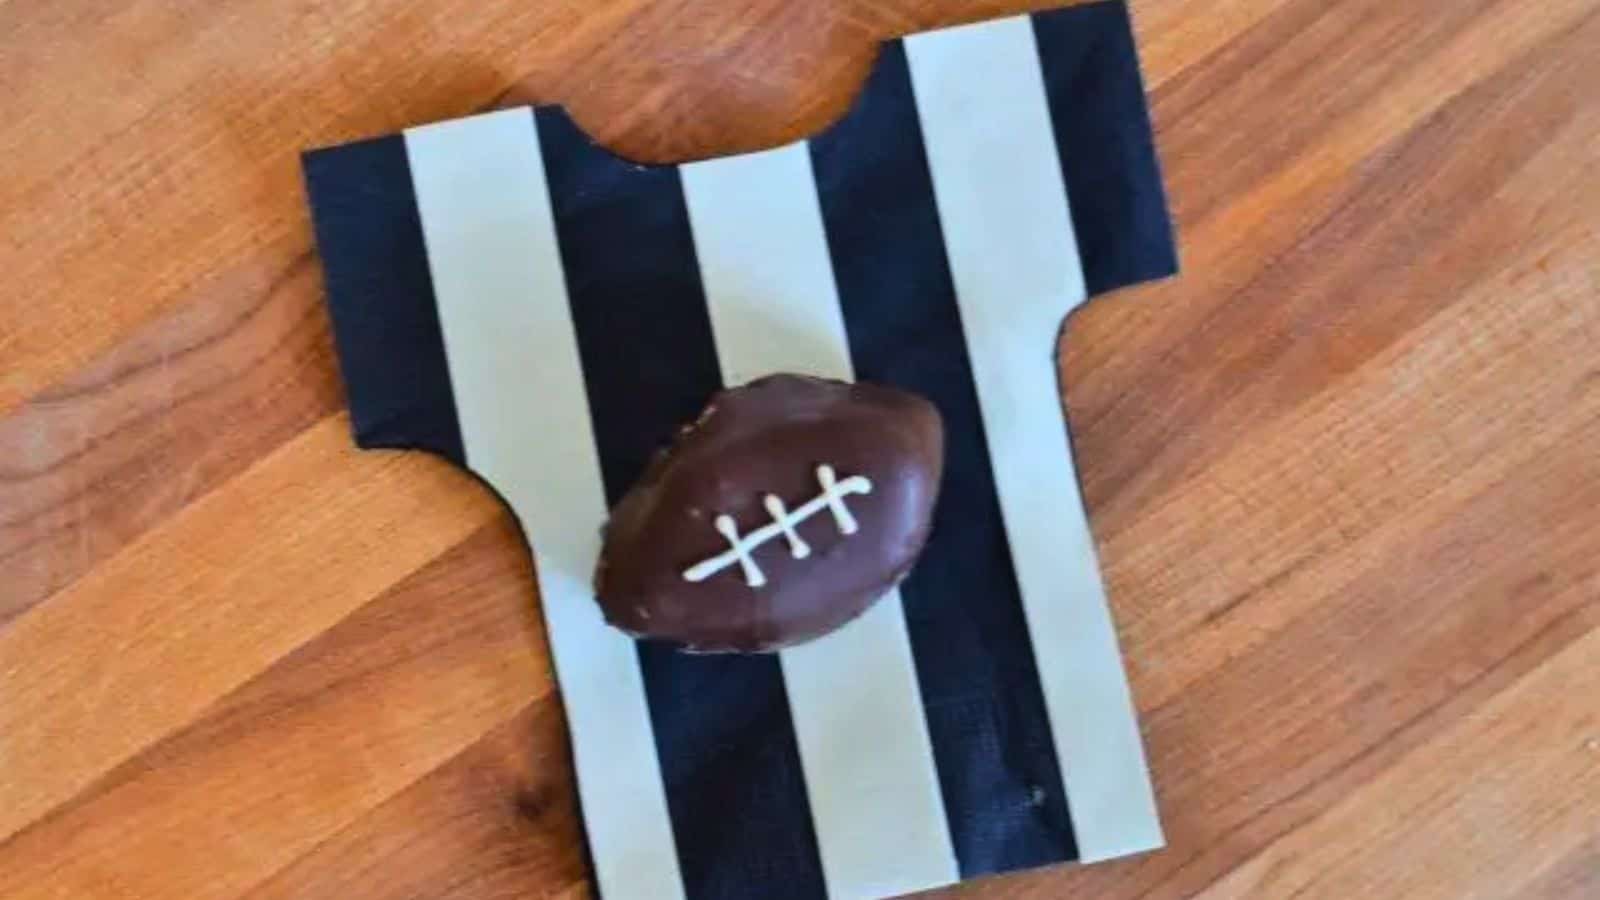 Image shows an overhead view of a football shaped oreo cookie ball on a referee striped napkin.